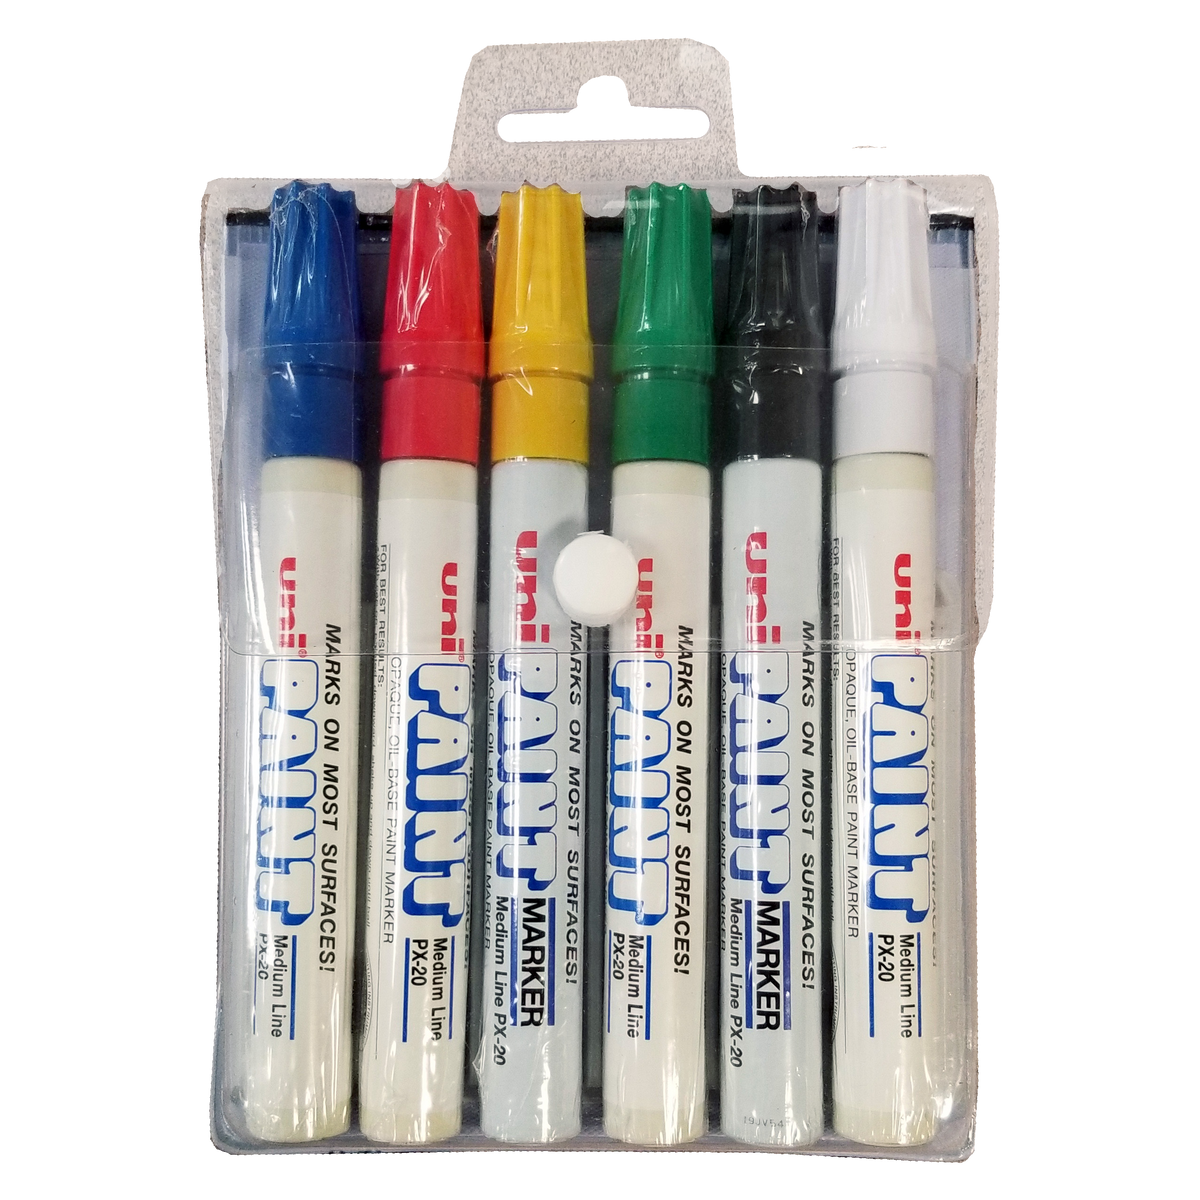 Sharpie Oil-Based Paint Marker, Medium Point, Red Ink, Pack of 6